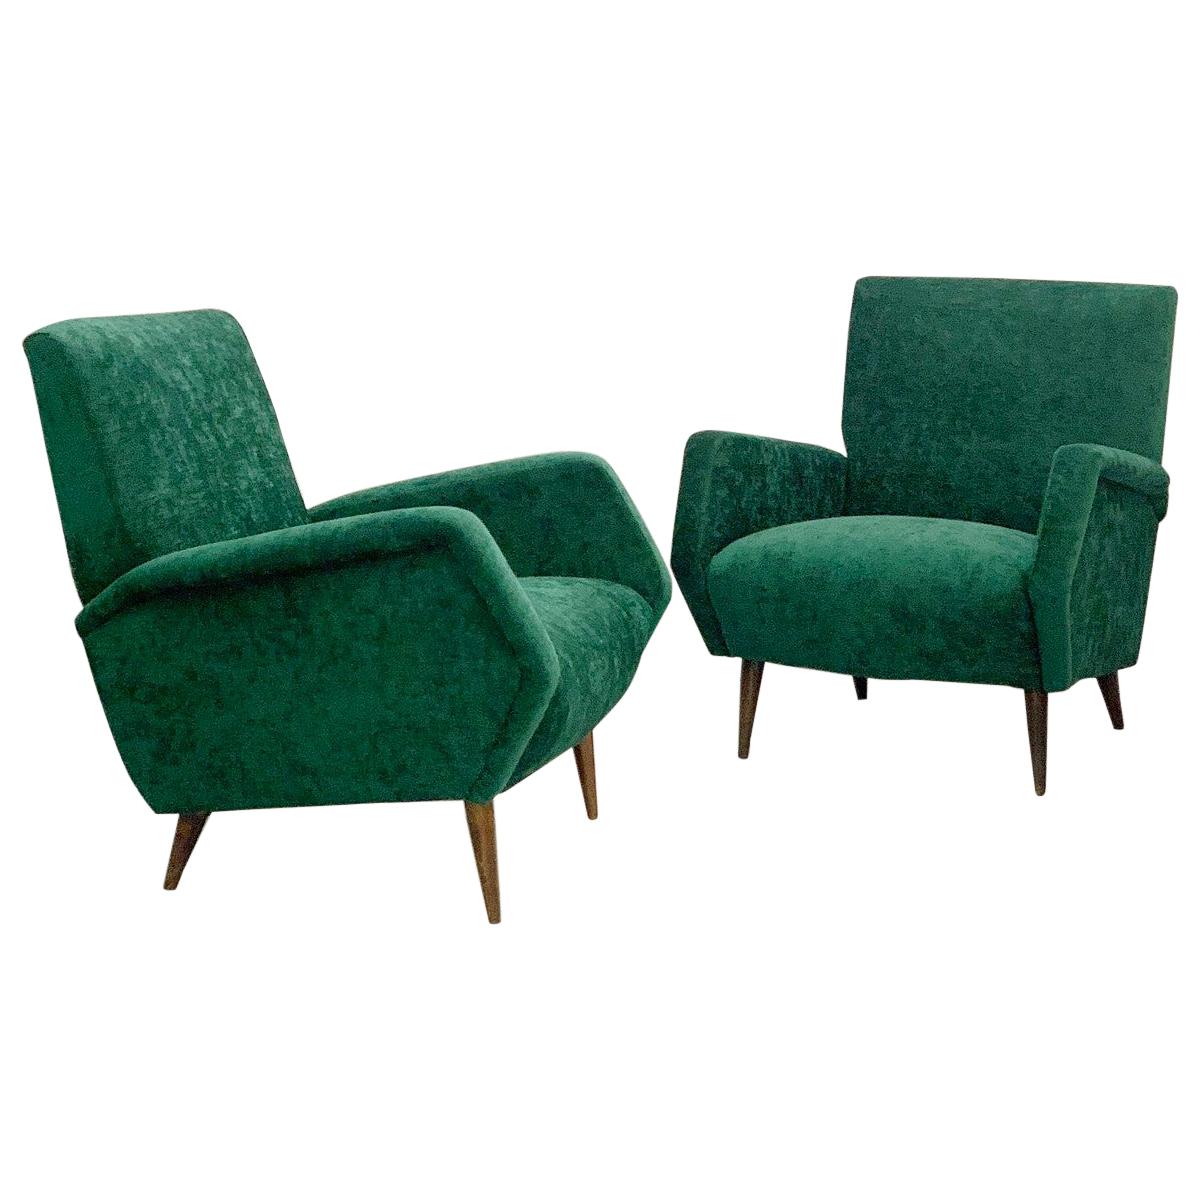 Gio Ponti Armchairs Model 803 for Cassina, Italy, 1954